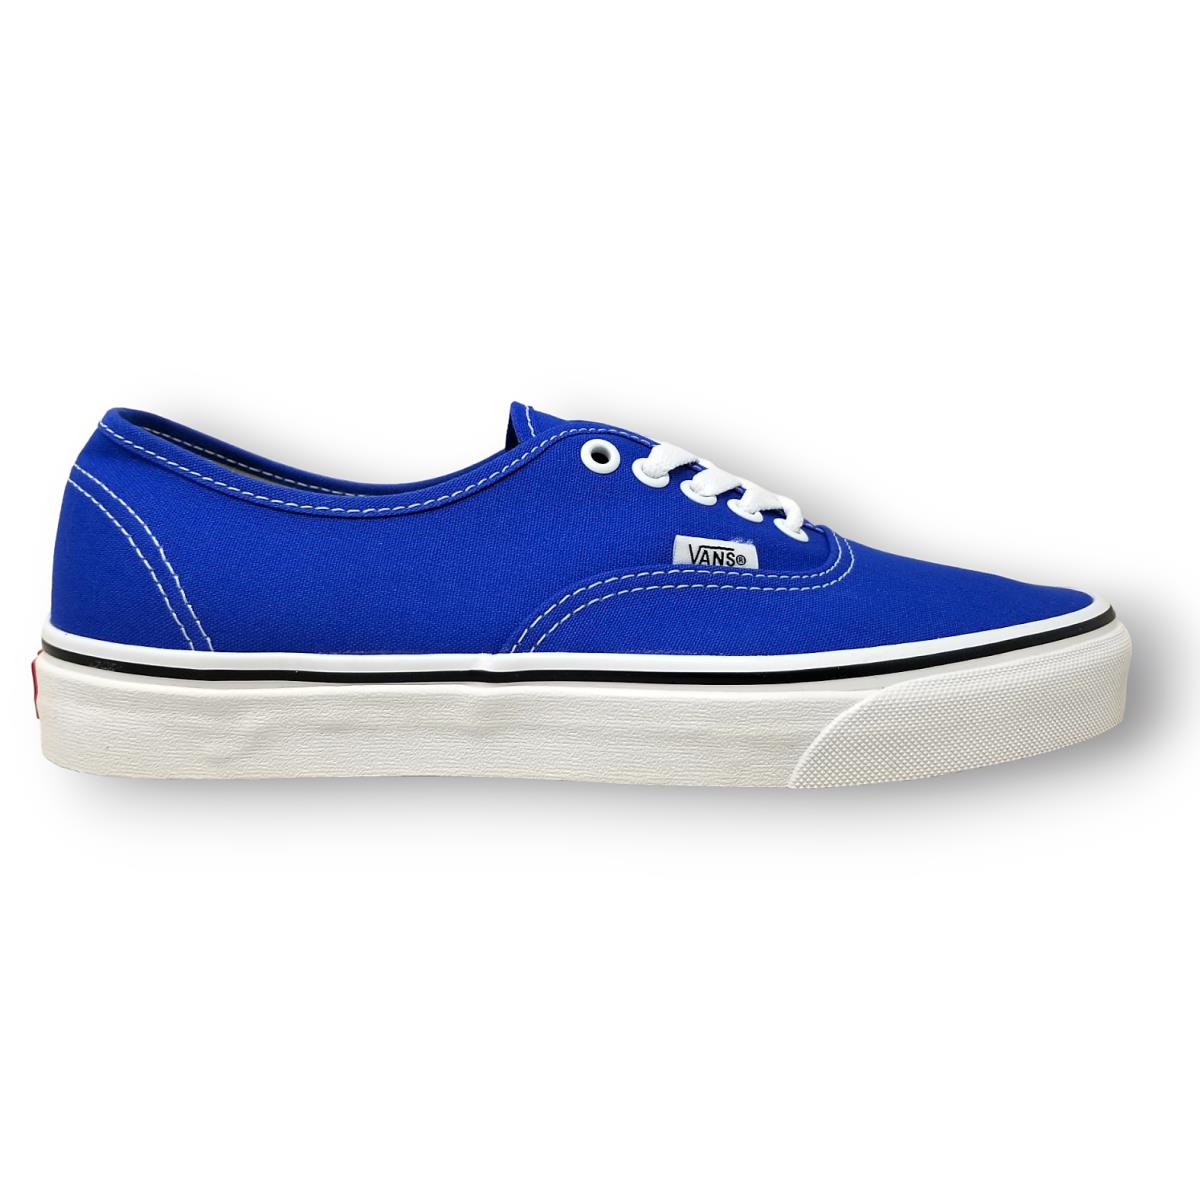 Vans shoes AUTHENTIC COLOR THEORY - COLOR THEORY DAZZLING BLUE 2